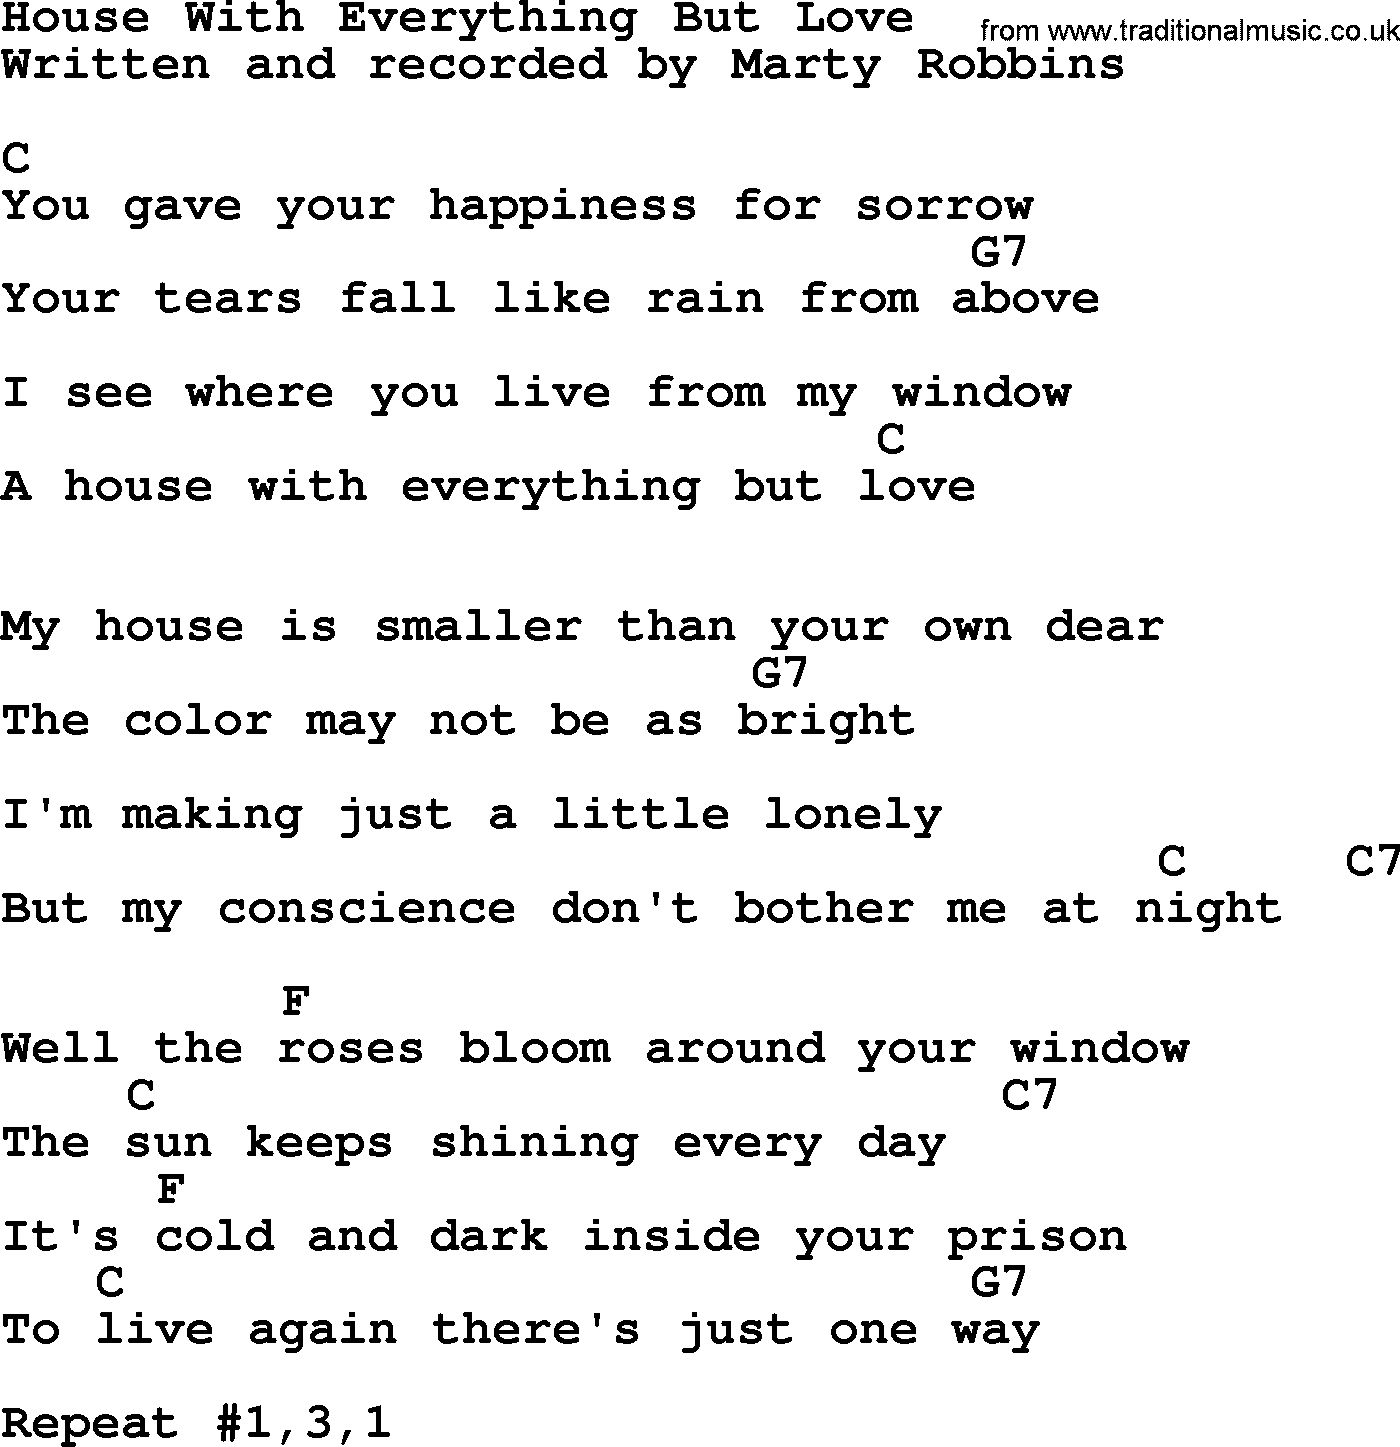 Marty Robbins song: House With Everything But Love, lyrics and chords